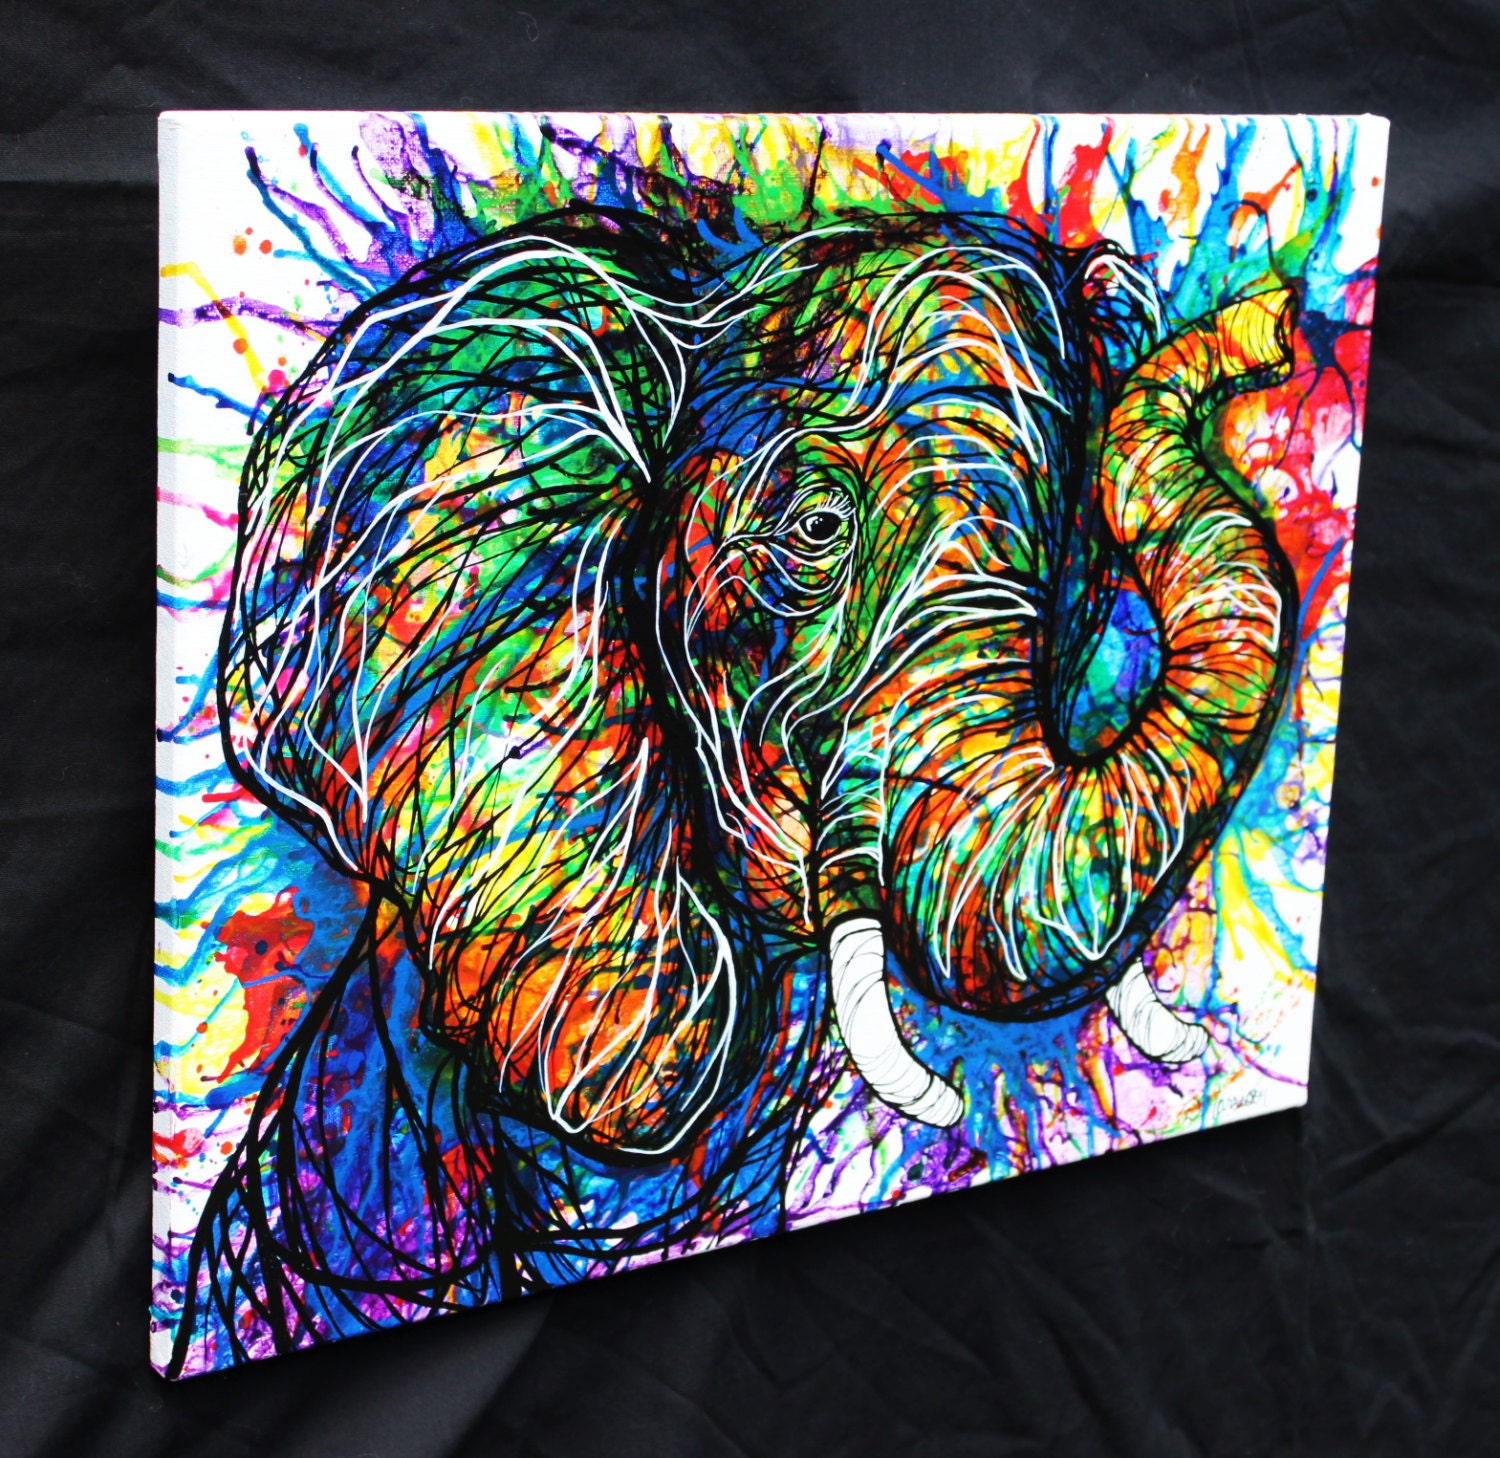 Abstract Colorful Elephant Art Original by DHarrisonPaintings
